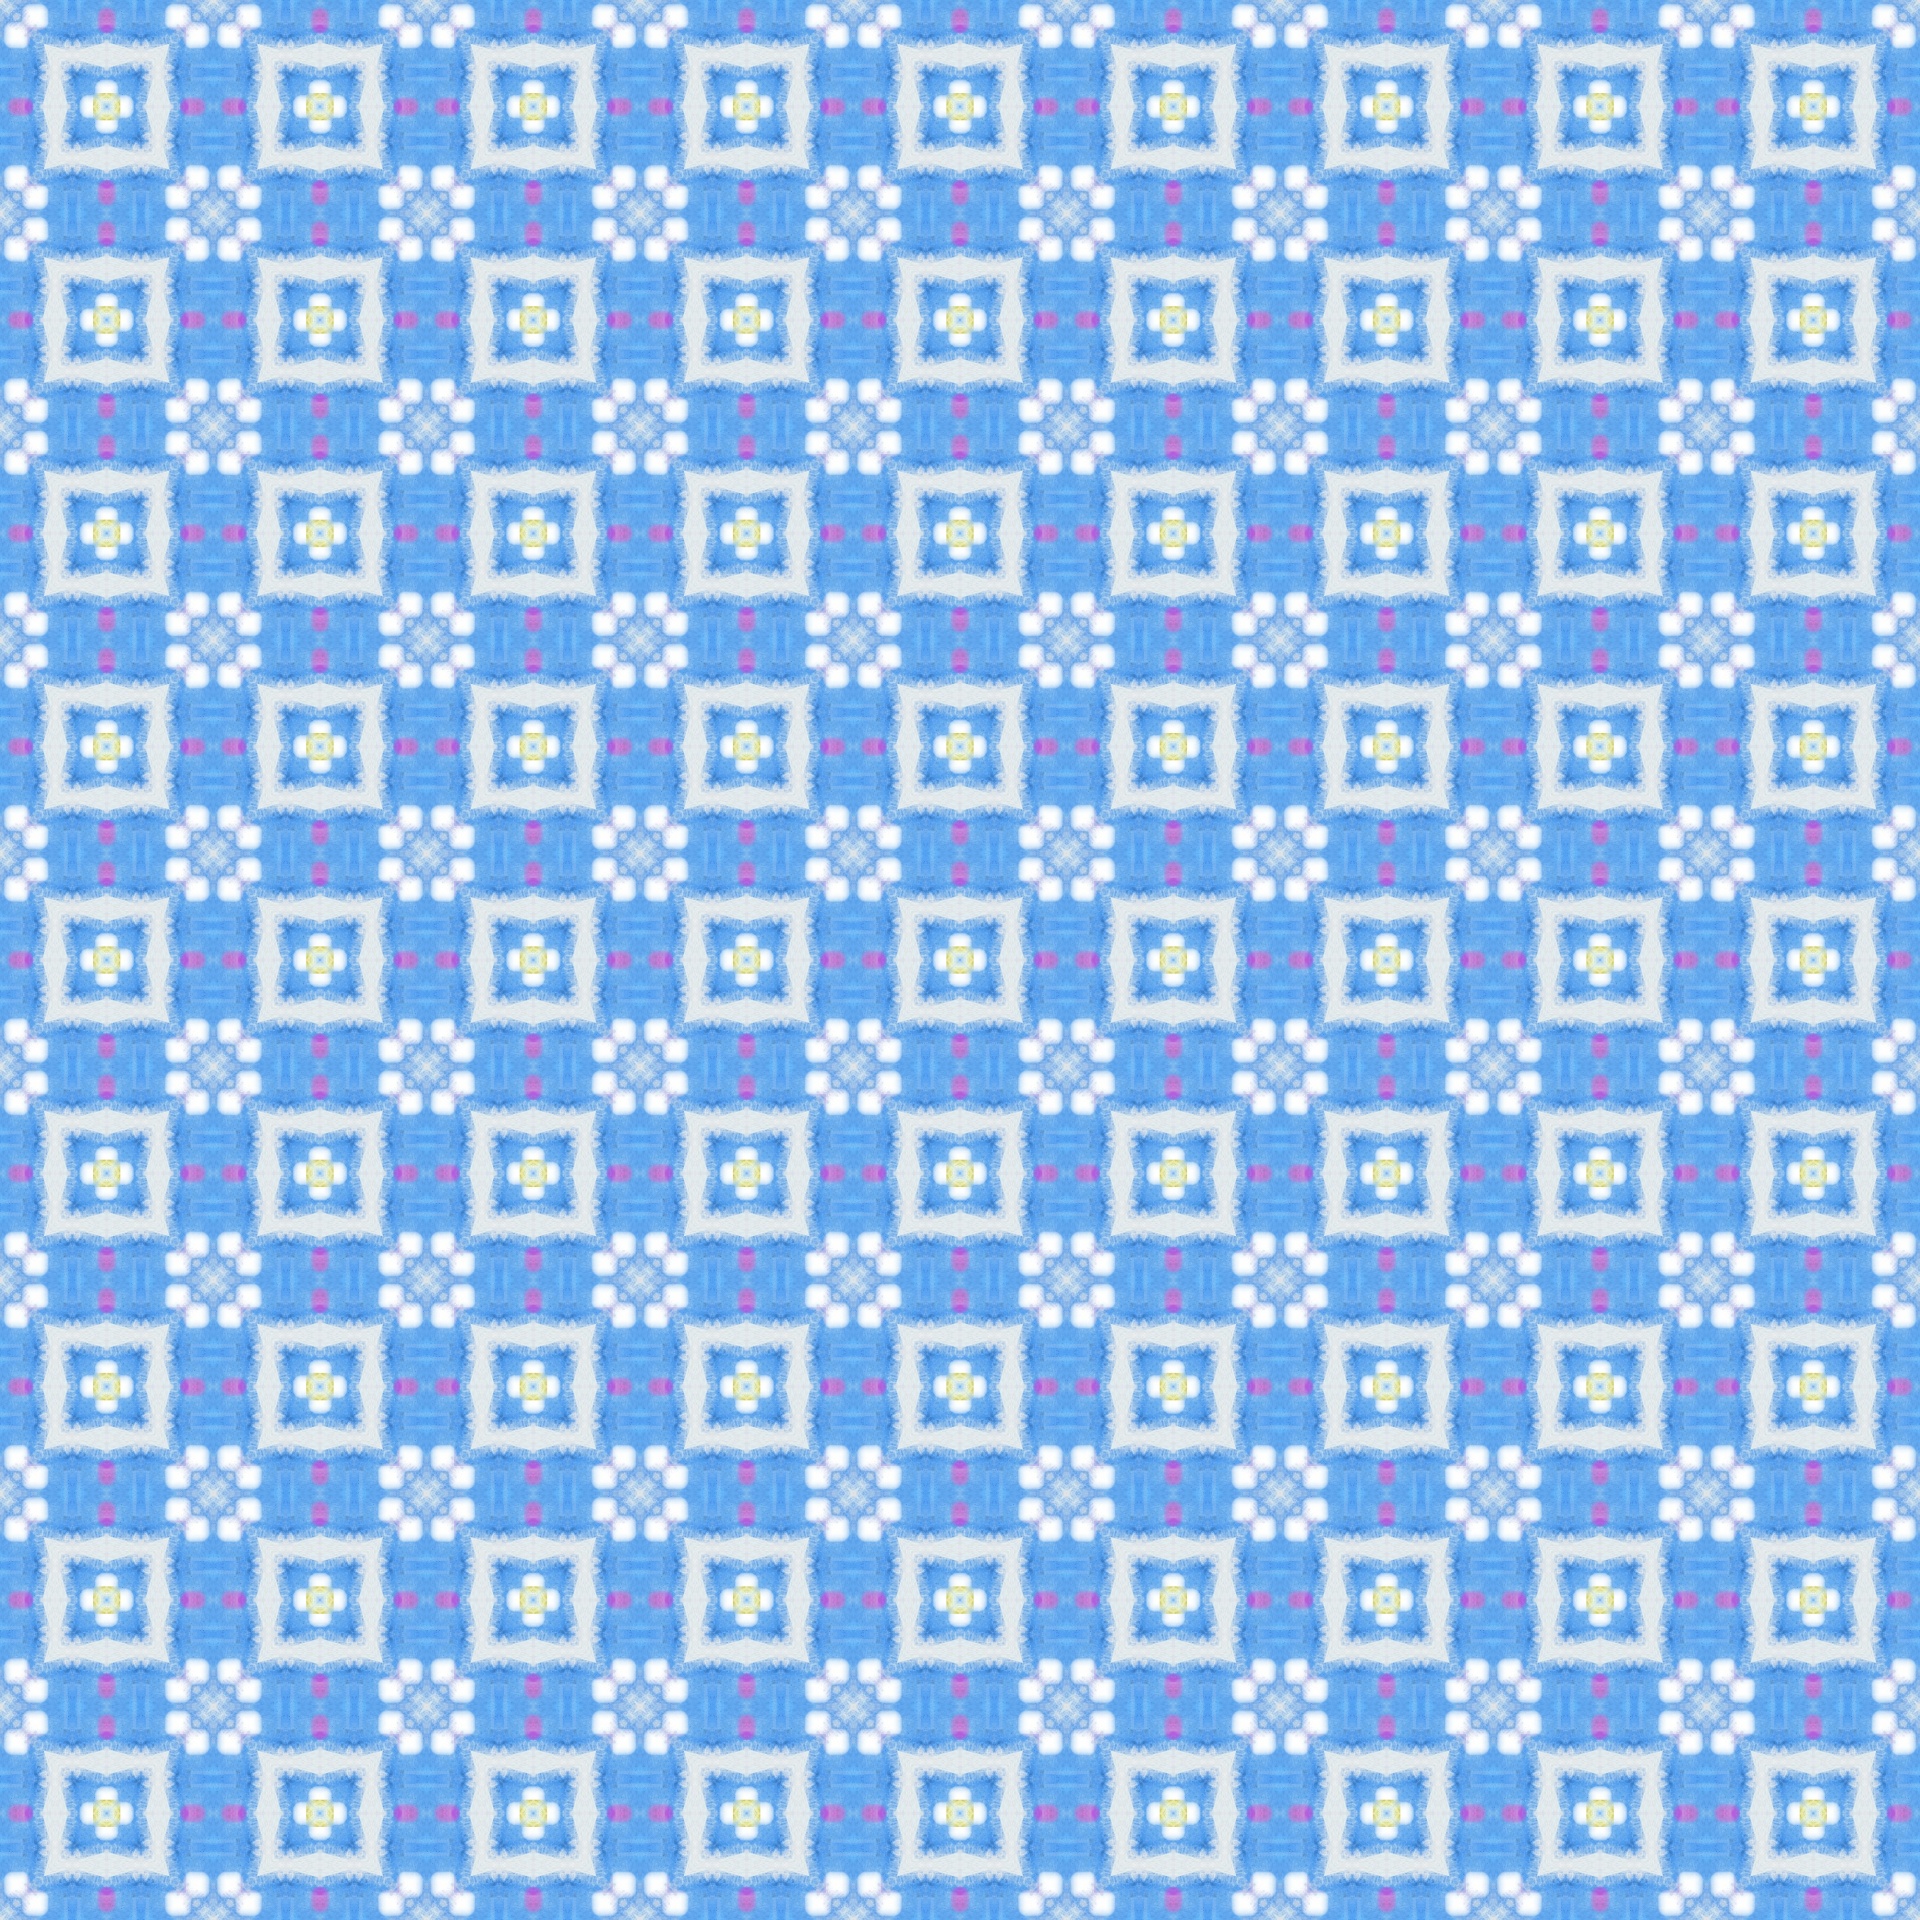 A completely seamless tileable textile pattern.